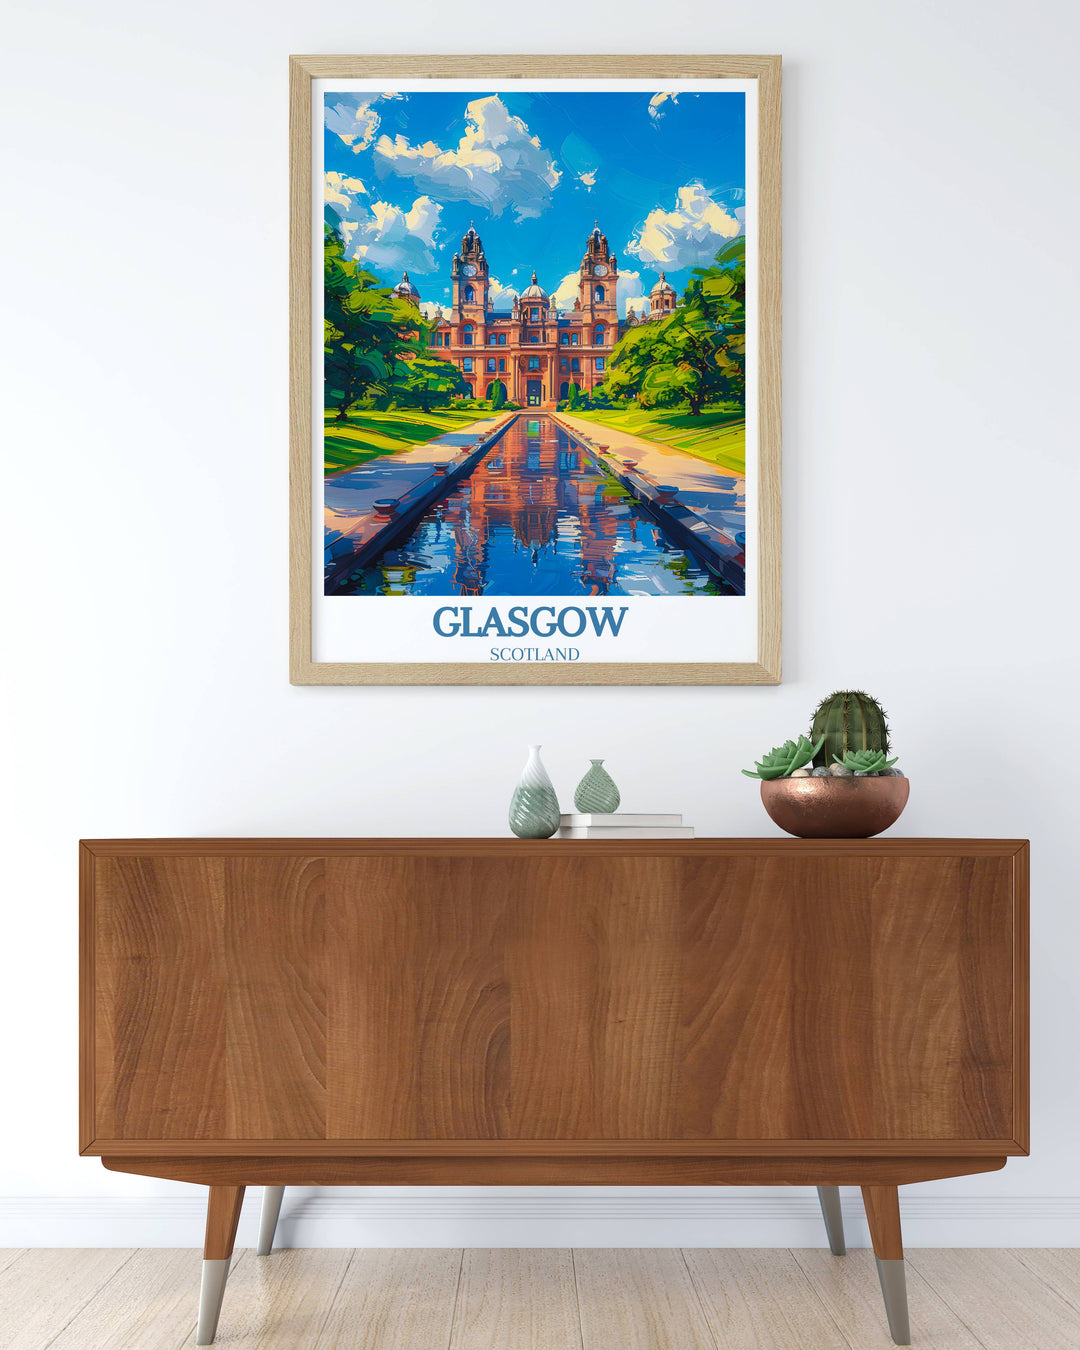 Elegantly crafted Glasgow poster art, highlighting the citys iconic landmarks with artistic flair, offers a refined touch to any home or office, making it a sought-after piece for collectors and enthusiasts of Scottish culture and travel memorabilia.